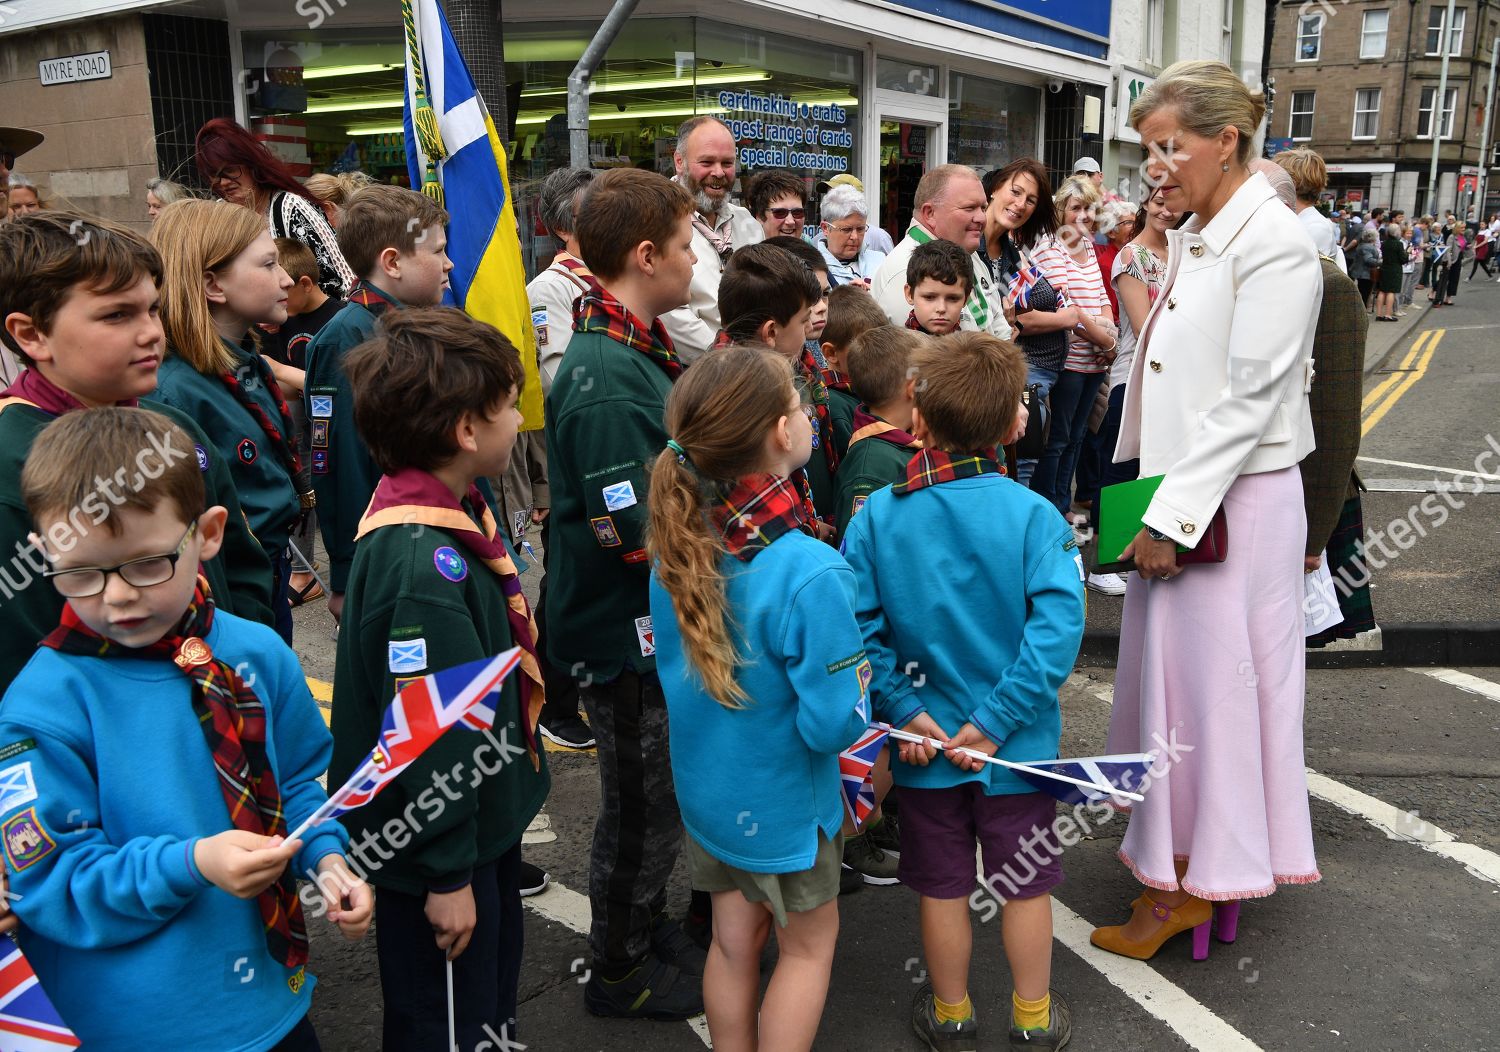 sophie-countess-of-wessex-and-prince-edward-visit-to-scotland-uk-shutterstock-editorial-10325445g.jpg